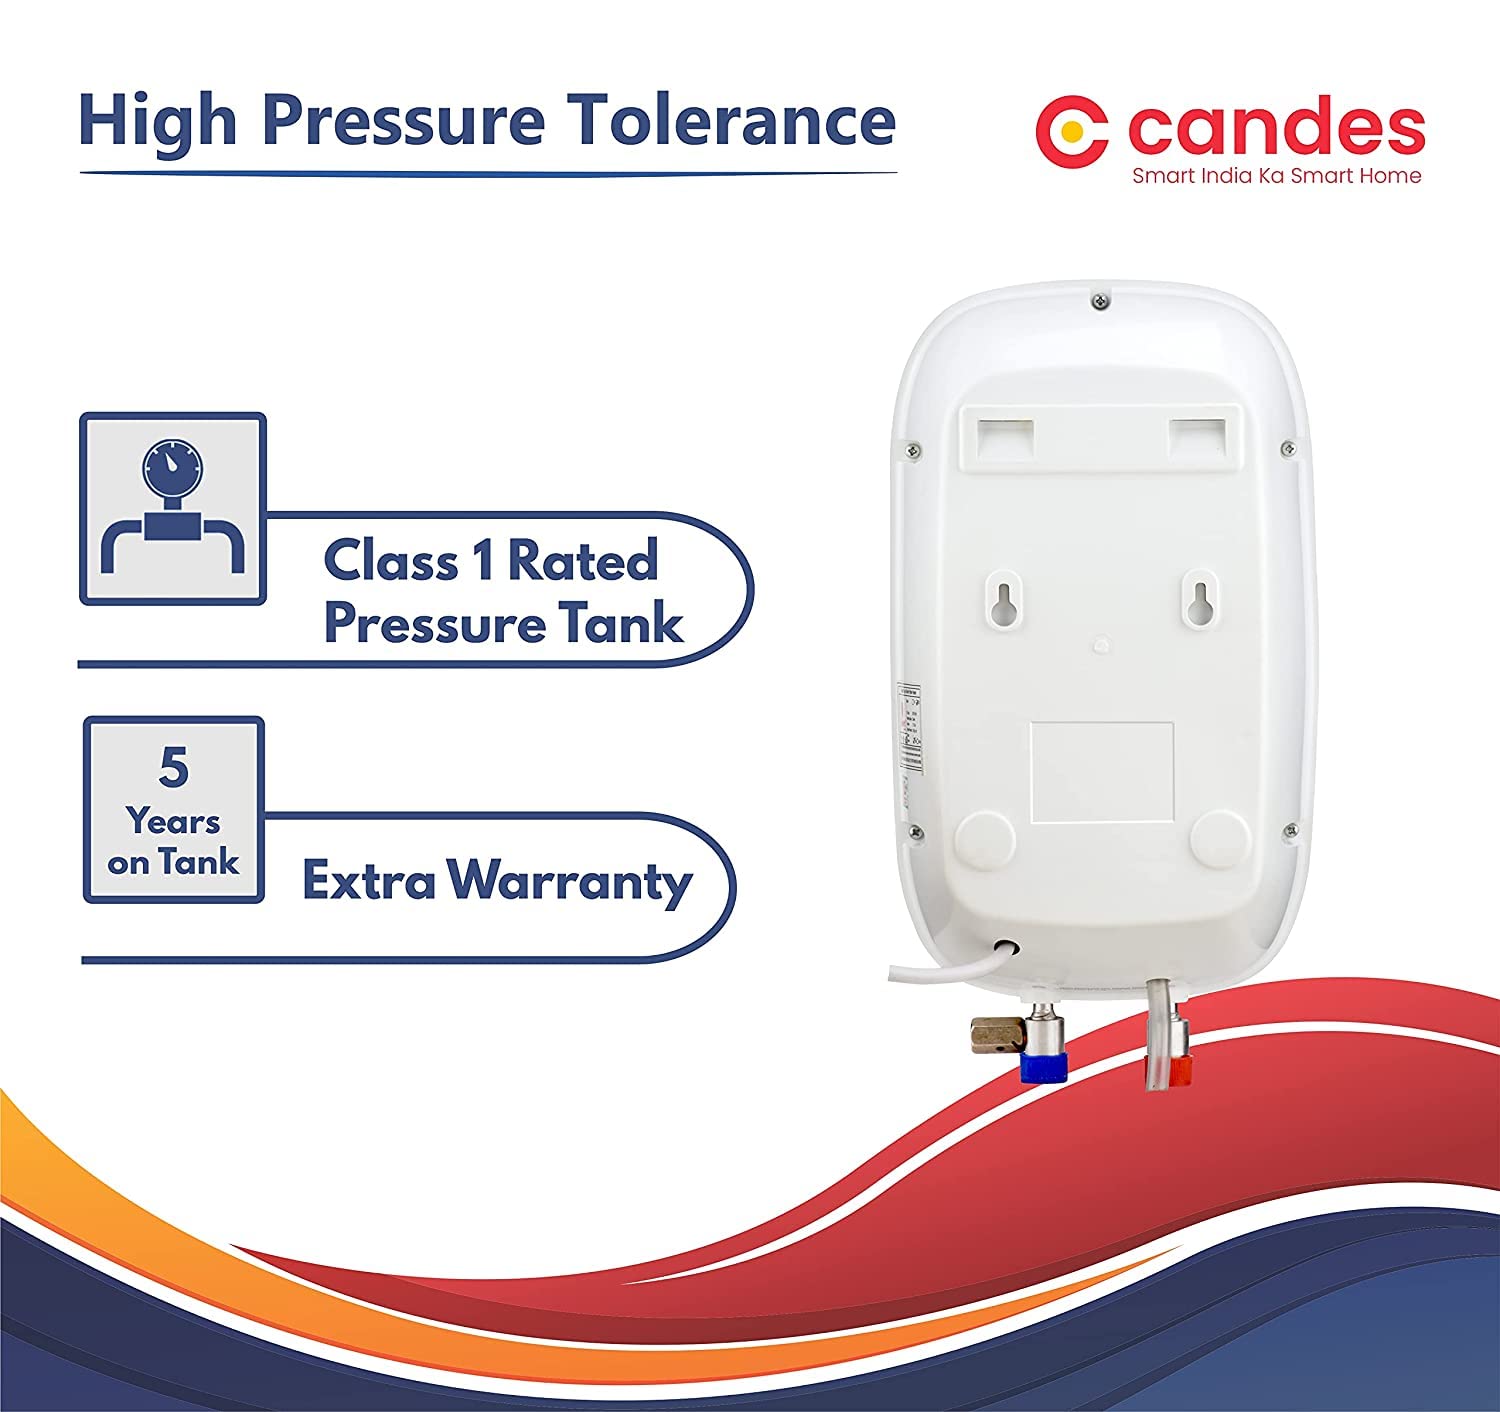 Candes Insto 3-Litre Instant Electric Water Heater Multiple Safety Geyser ABS Body, White